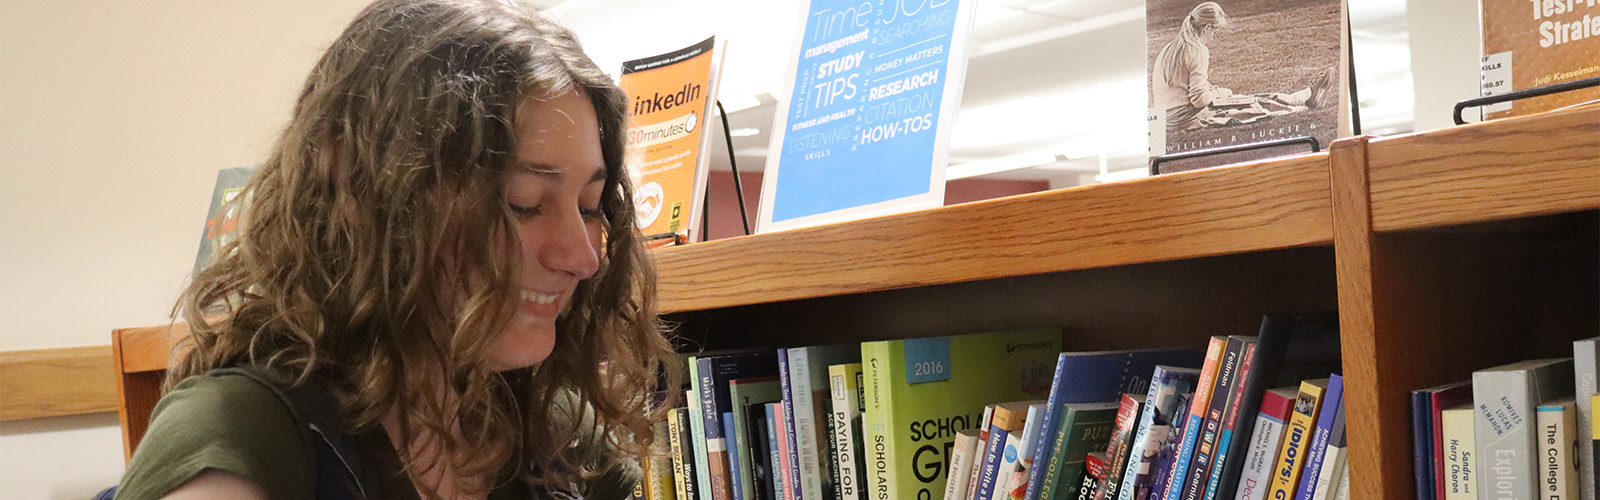 Josie Krasny browses books on the Student Success shelf at James Branch Cabell Library.